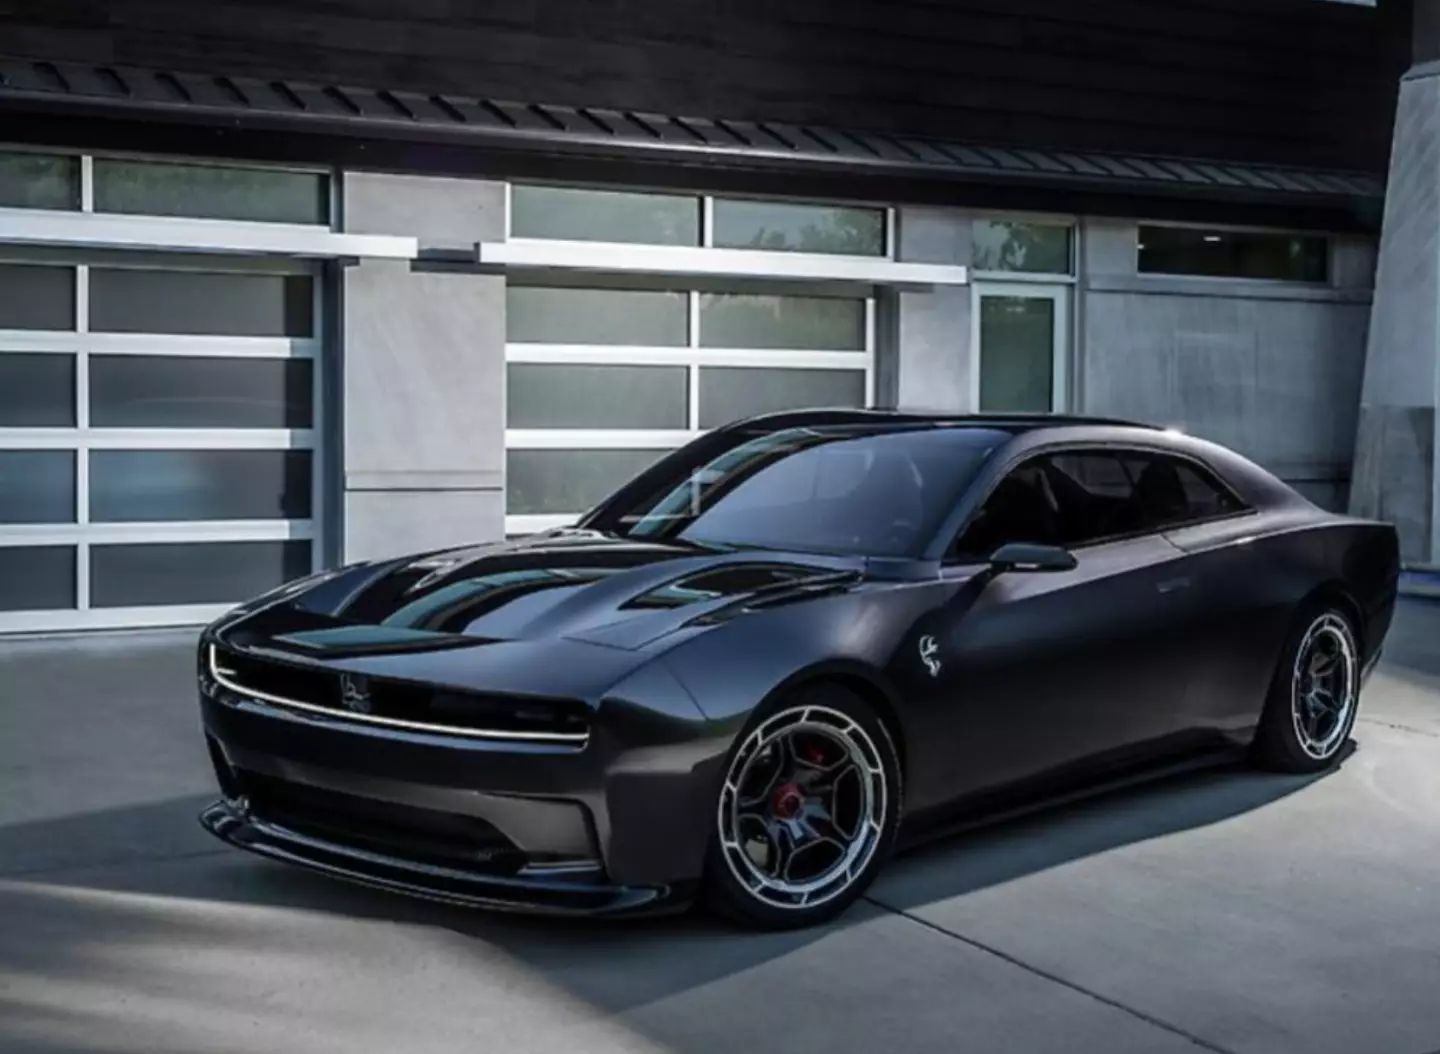 Dodge has unveiled an electric prototype that mimics the roar of a 797-horsepower Hellcat.